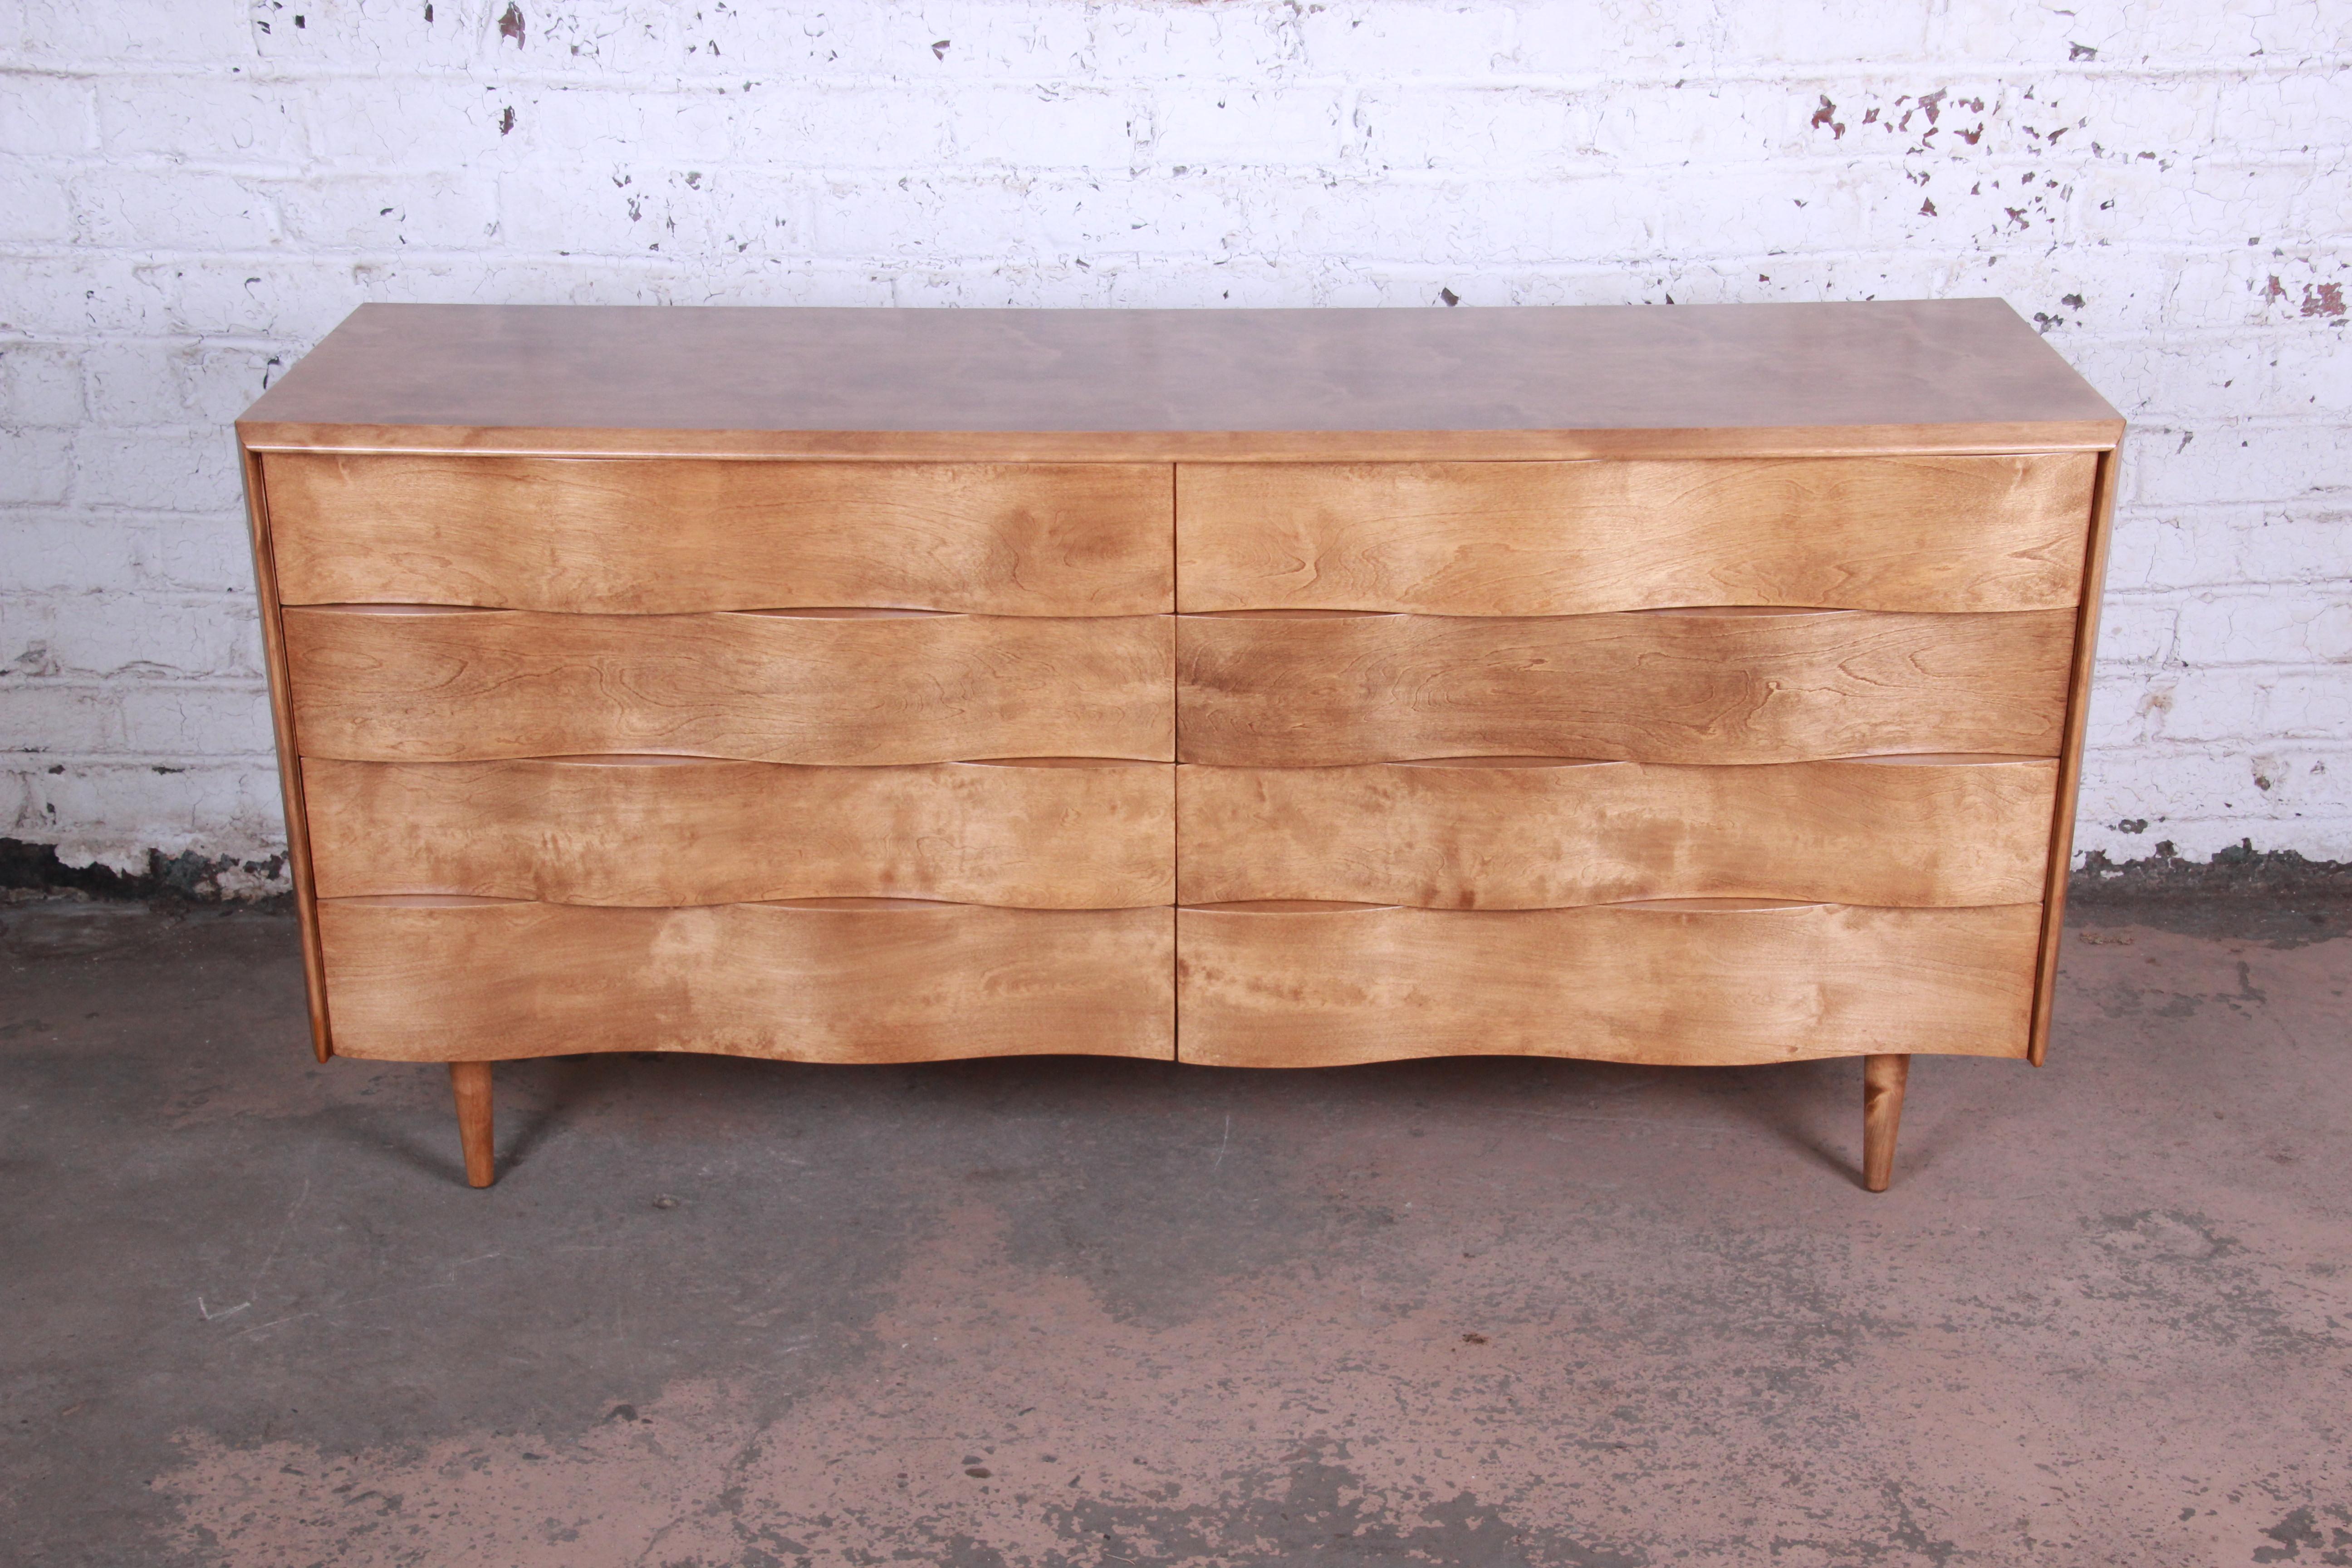 Offering a rare and exceptional Mid-Century Modern wave front long dresser designed by Edmond Spence. The dresser features a unique wave front design and stunning birch wood grain. It offers ample storage good storage deep dovetailed drawers. The